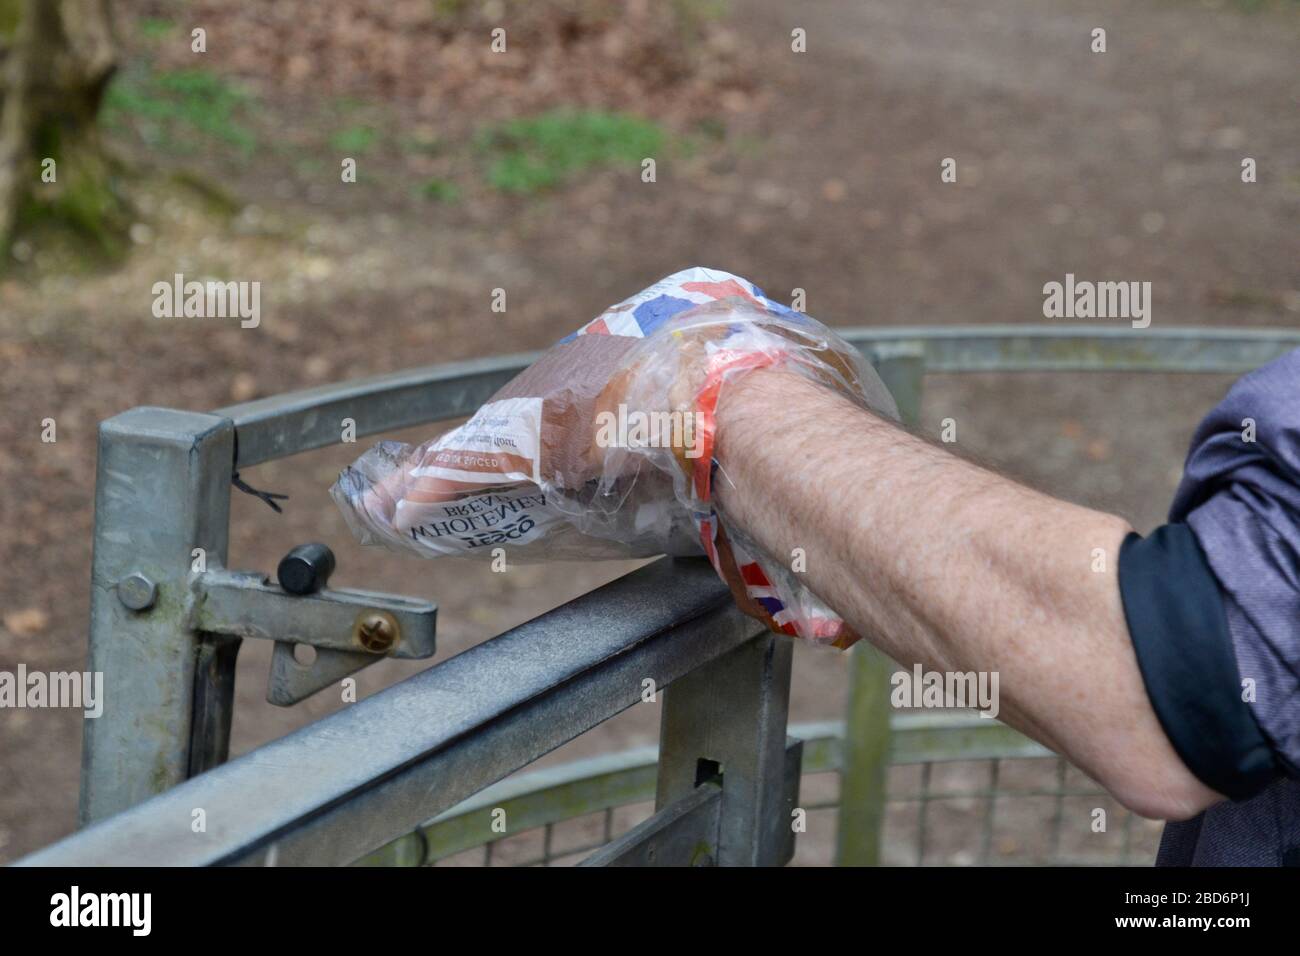 Man uses plastic bag to safely open a gate in the countryside without touching the latch with his hands. Coronavirus lockdown UK Stock Photo